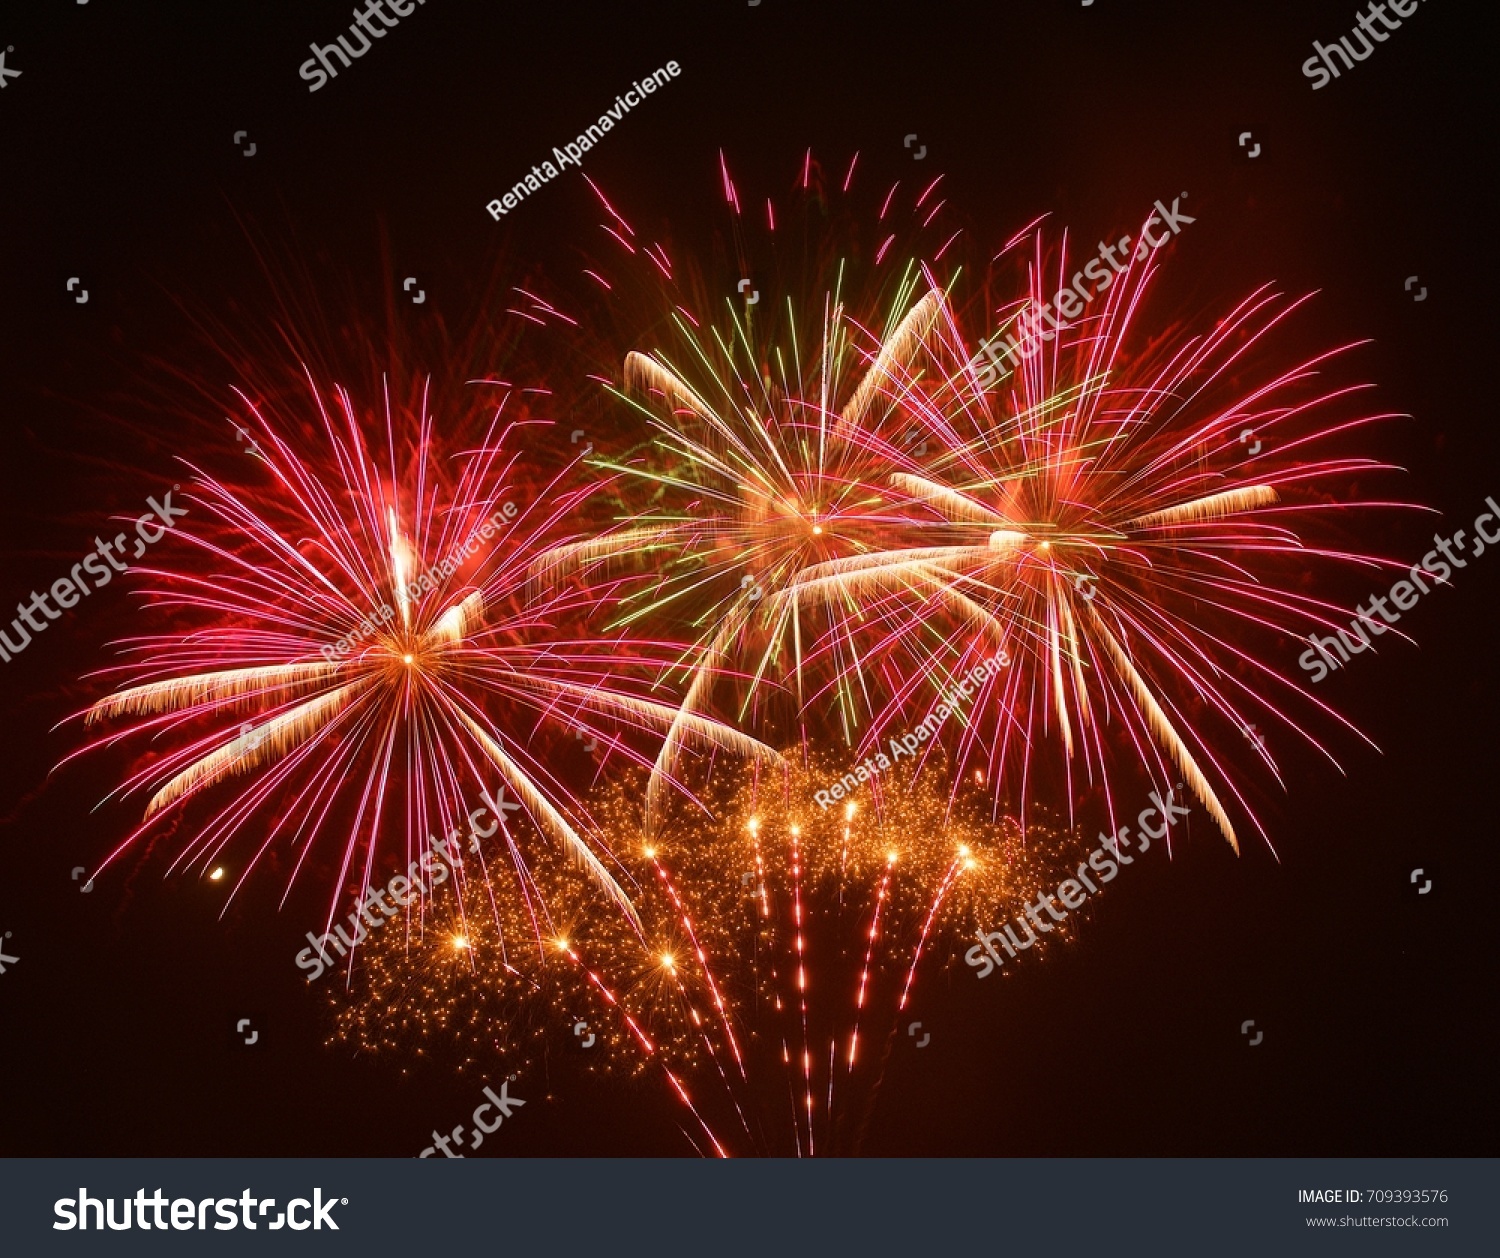 Fireworks background. Red fireworks. Happiness concept #709393576